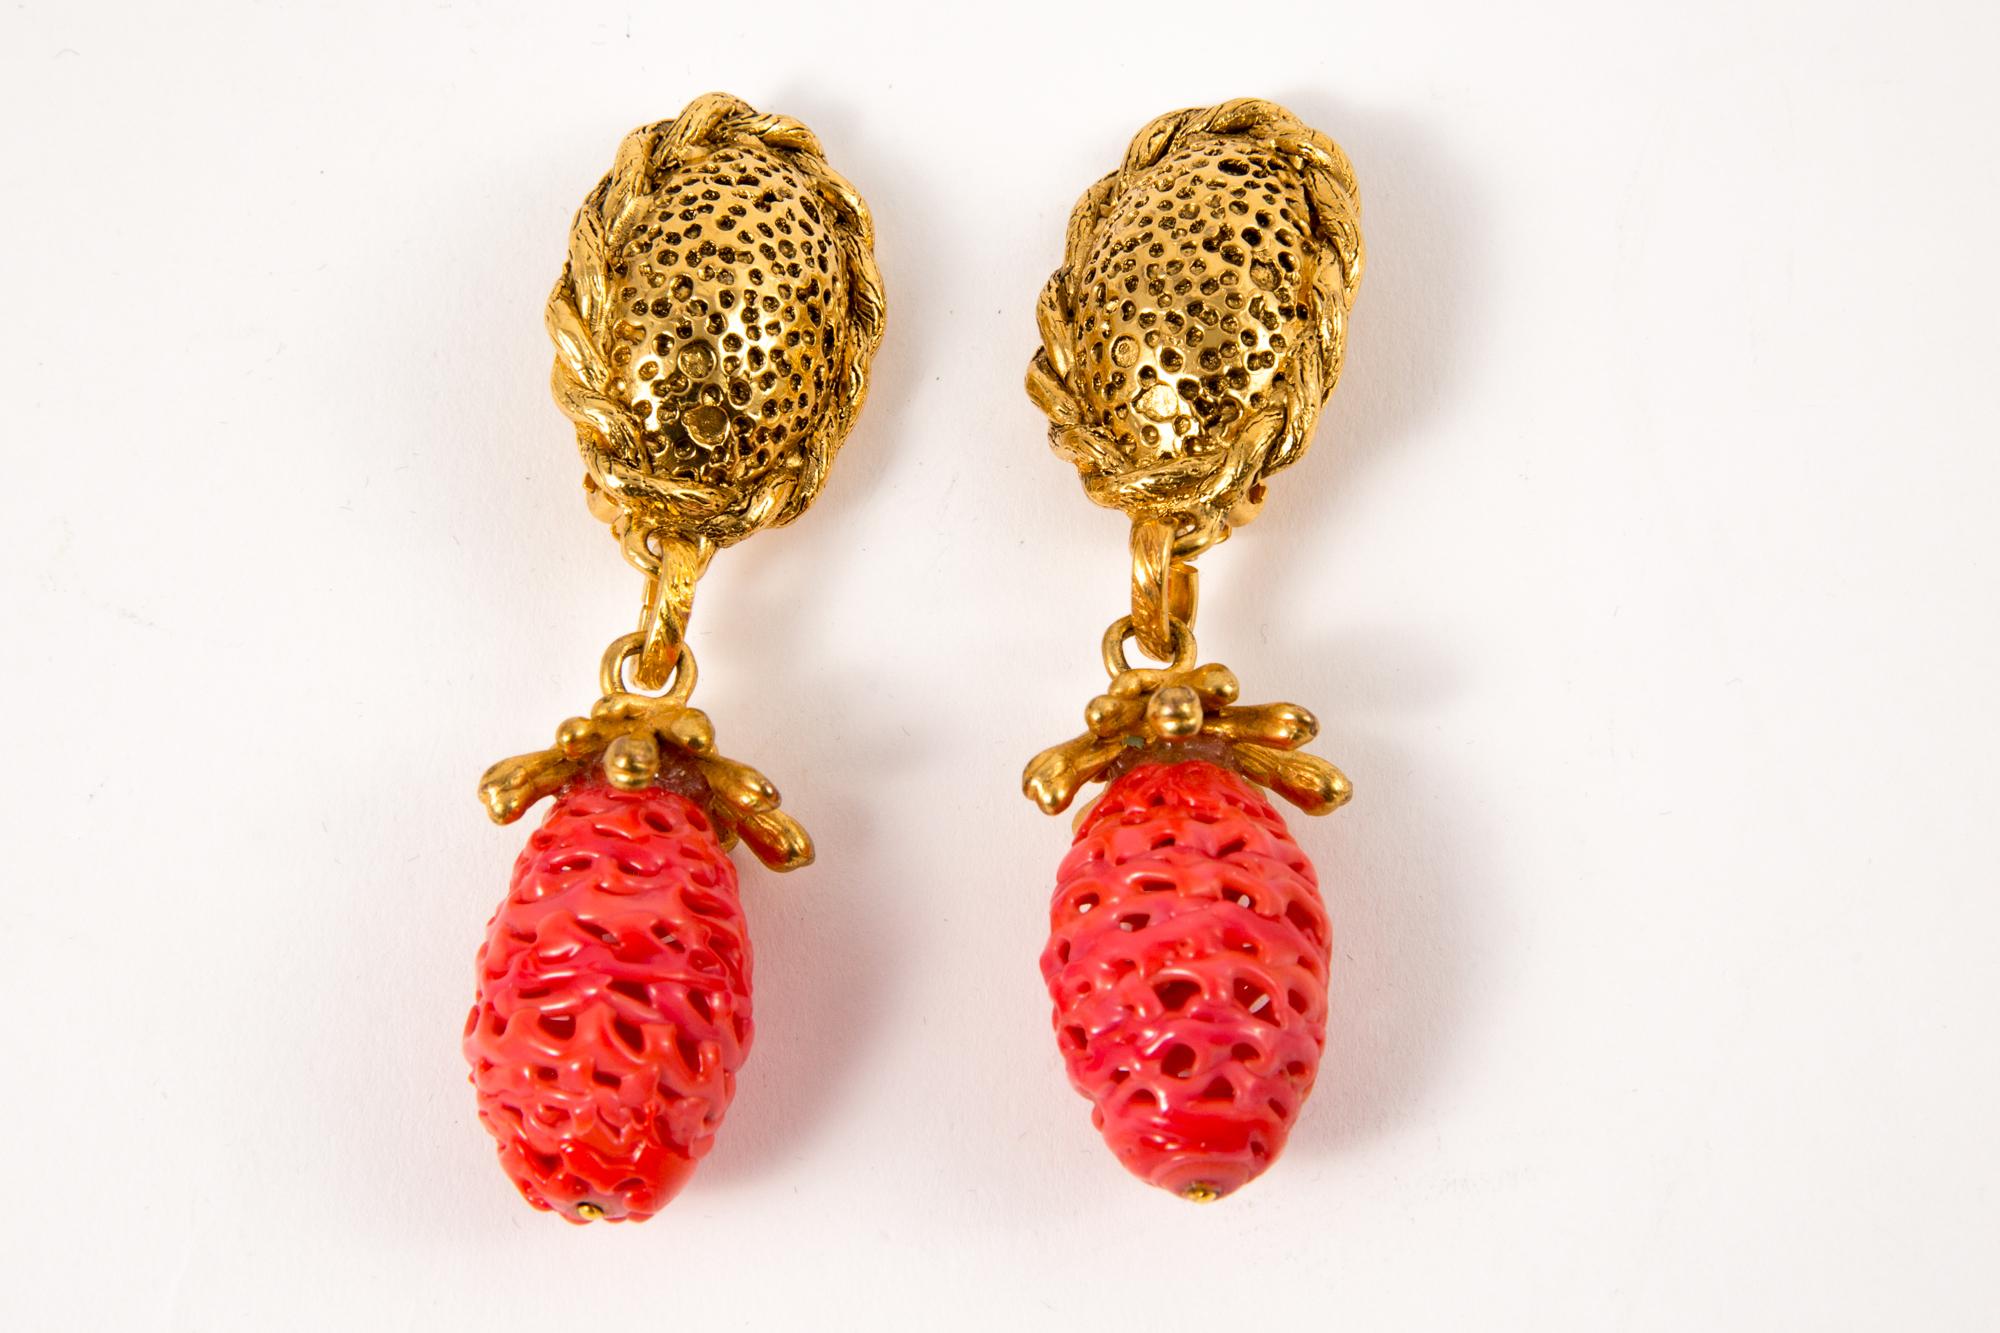 Yves Saint Laurent YSL by Robert Gossens featuring red strawberries with gold tone metal details,  a clip-on fastening, back plaque YSL. 
Circa 1990s 
They come as a pair.
Maxi length:2.7in (7cm)
In excellent vintage condition. Made in France.  
We